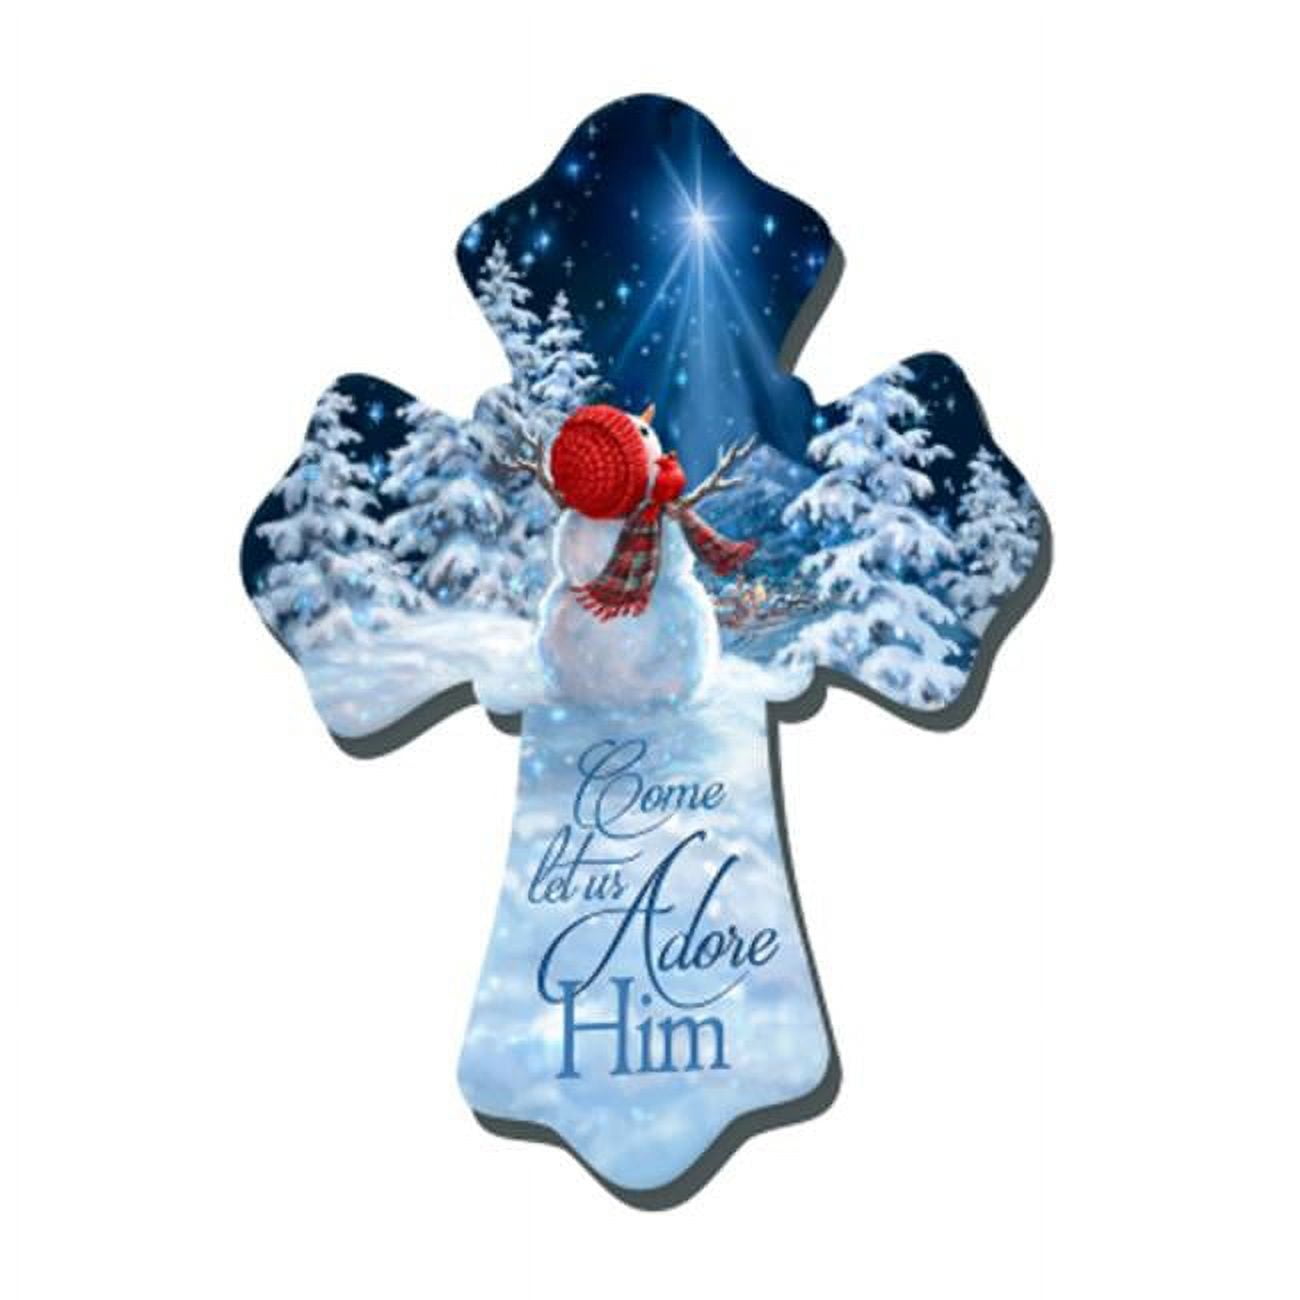 Glow Decor 137717 6 X 8 In. Snowman & Come Let Us Adore Him Wall Cross